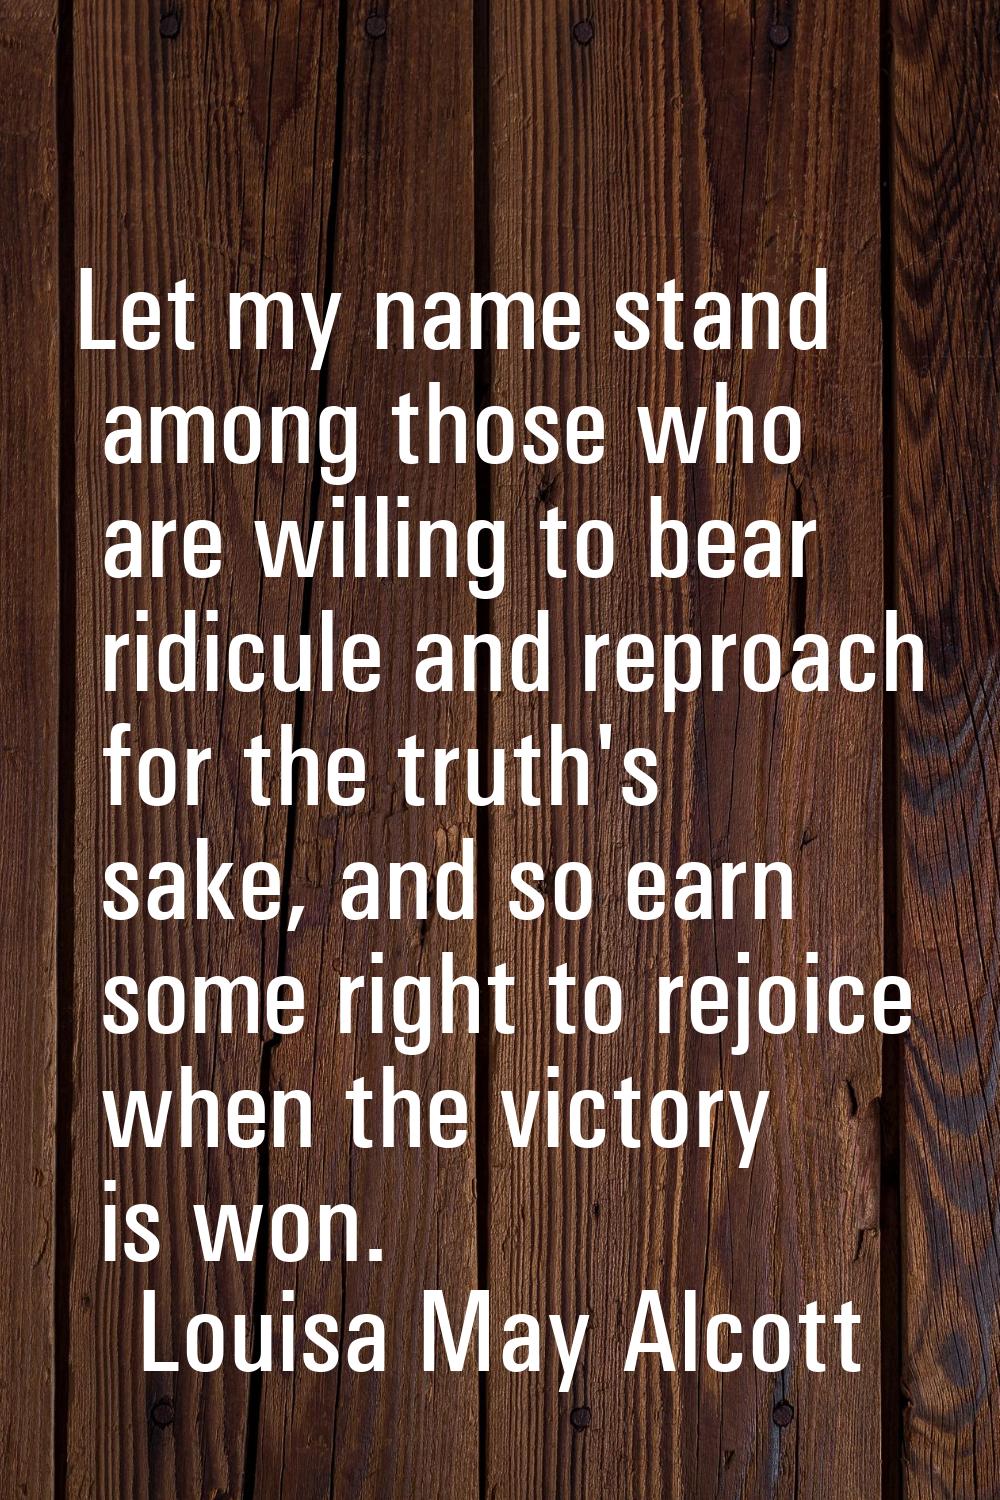 Let my name stand among those who are willing to bear ridicule and reproach for the truth's sake, a